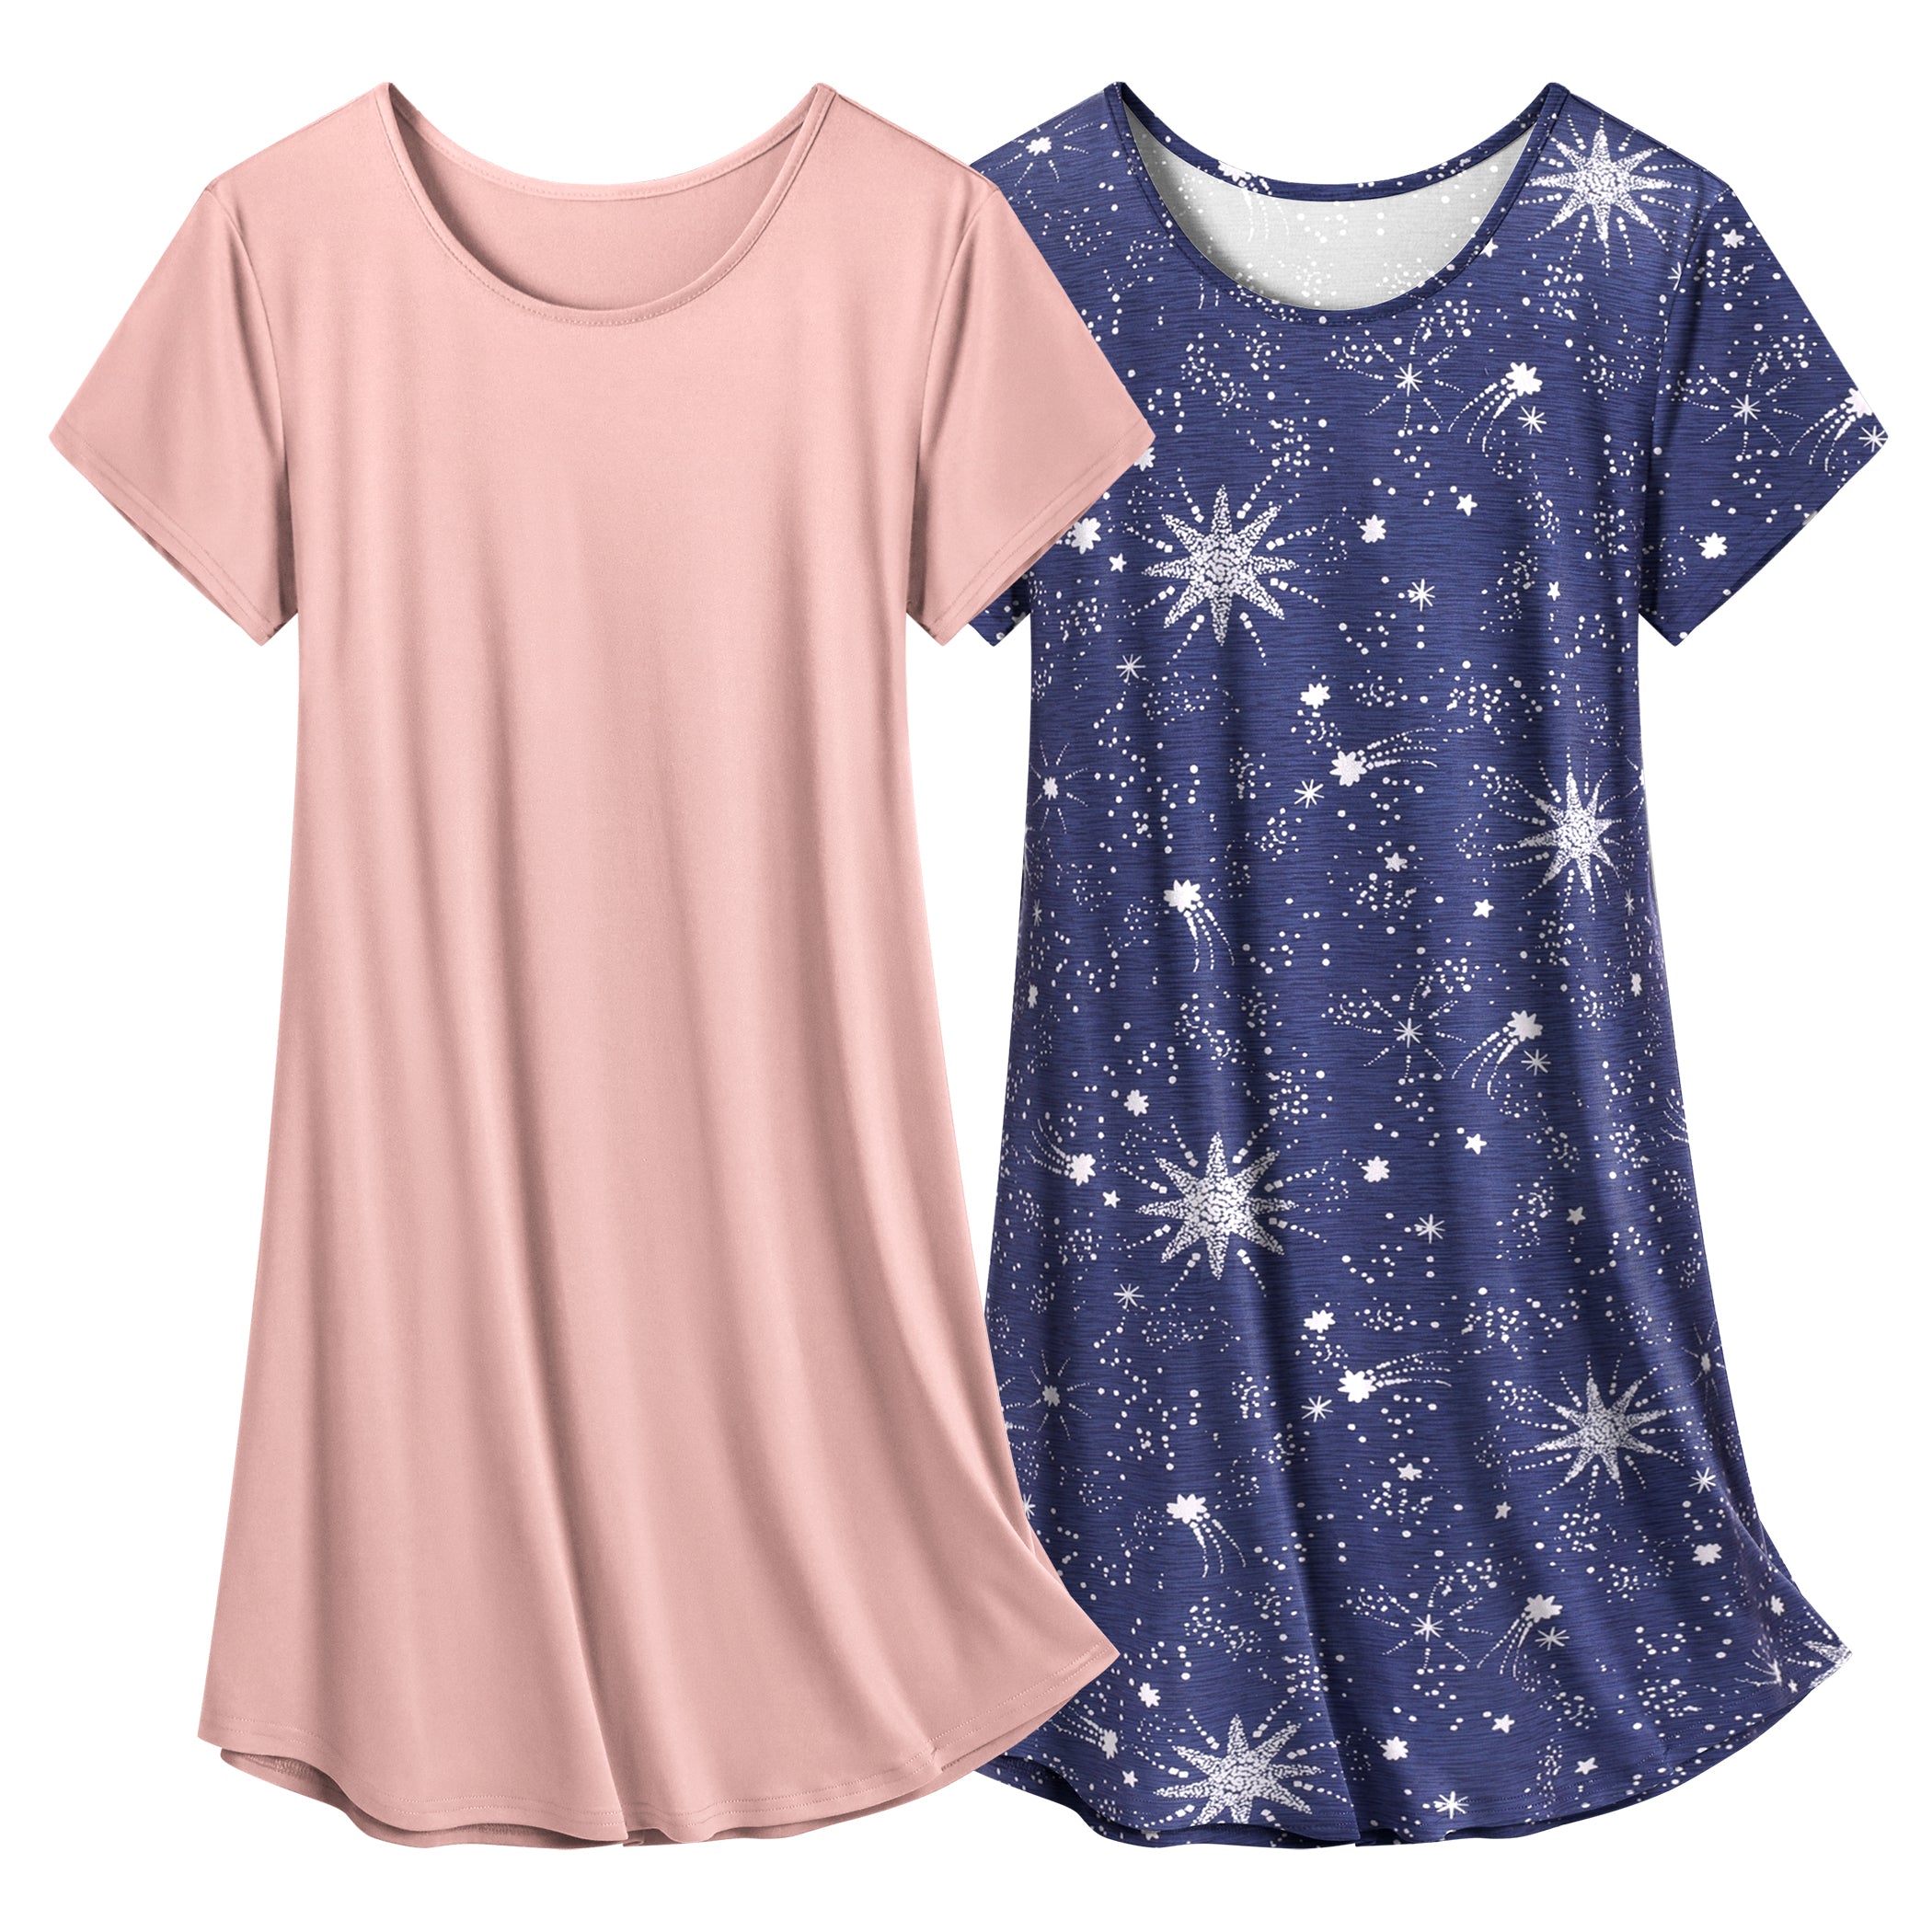 Soft 2 Pack Short Sleeve Nightgowns